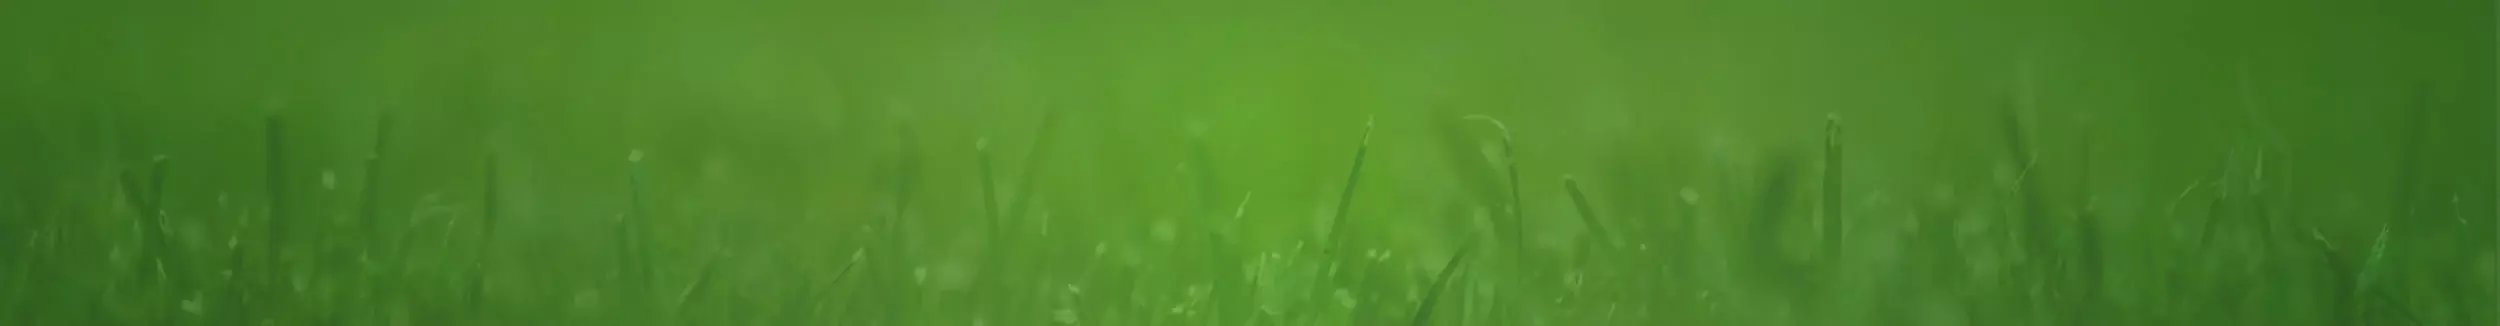 blog banner grass with green background images.